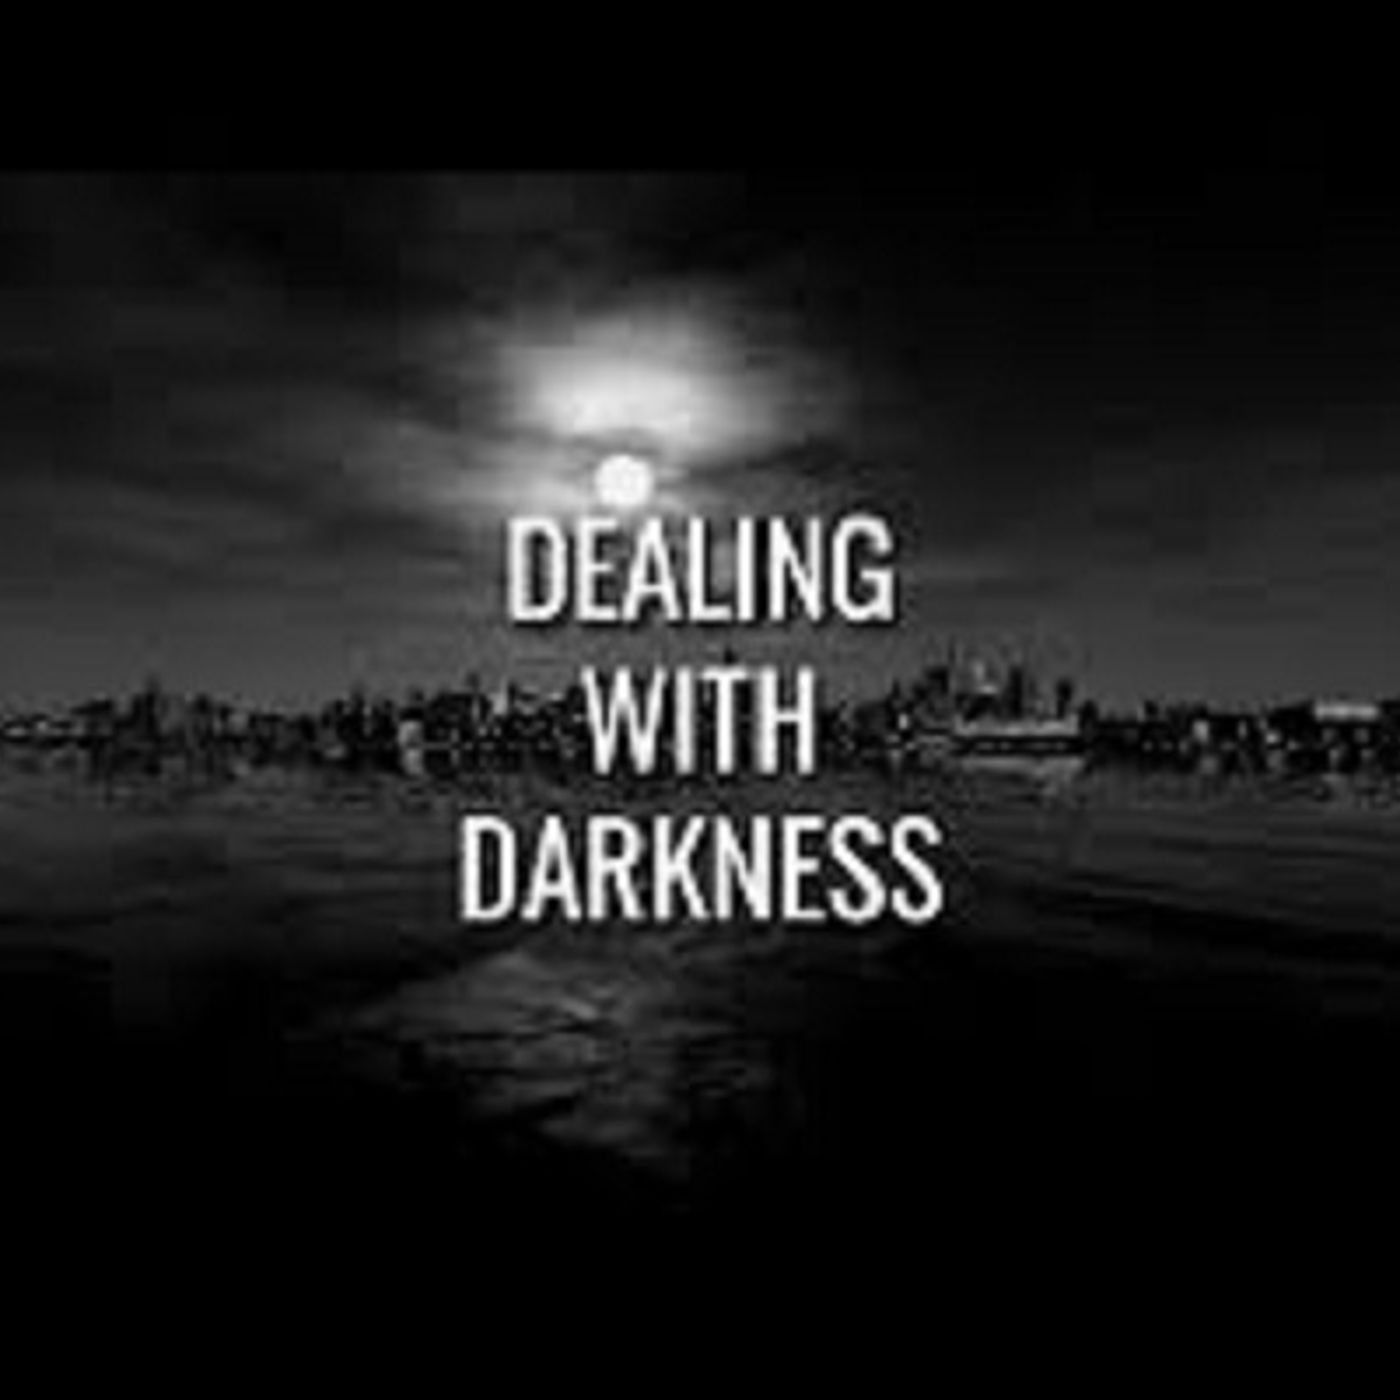 Dealing with Darkness